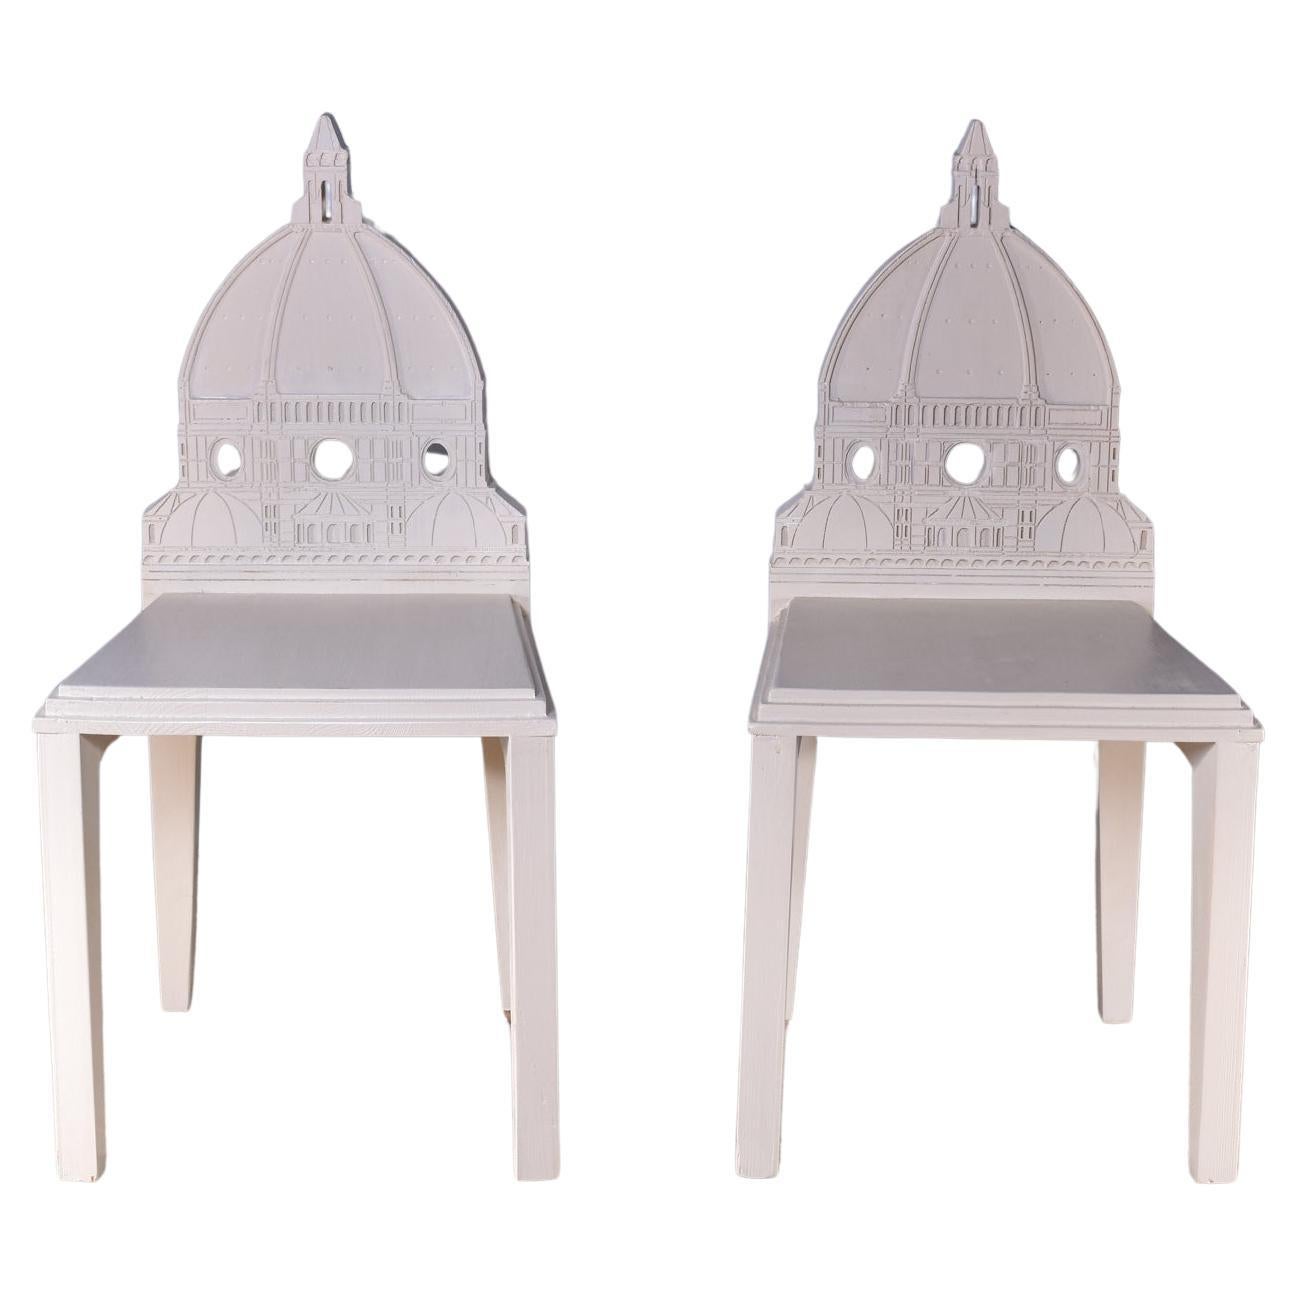 A wonderful pair of Santa Maria Duomo chairs by the Italian designer Cosimo De Vita.

The chairs are hand crafted in Florence from solid Fir wood and finished in a cream paint.

Both chairs are signed and dated by Cosimo De Vita.

Available in any